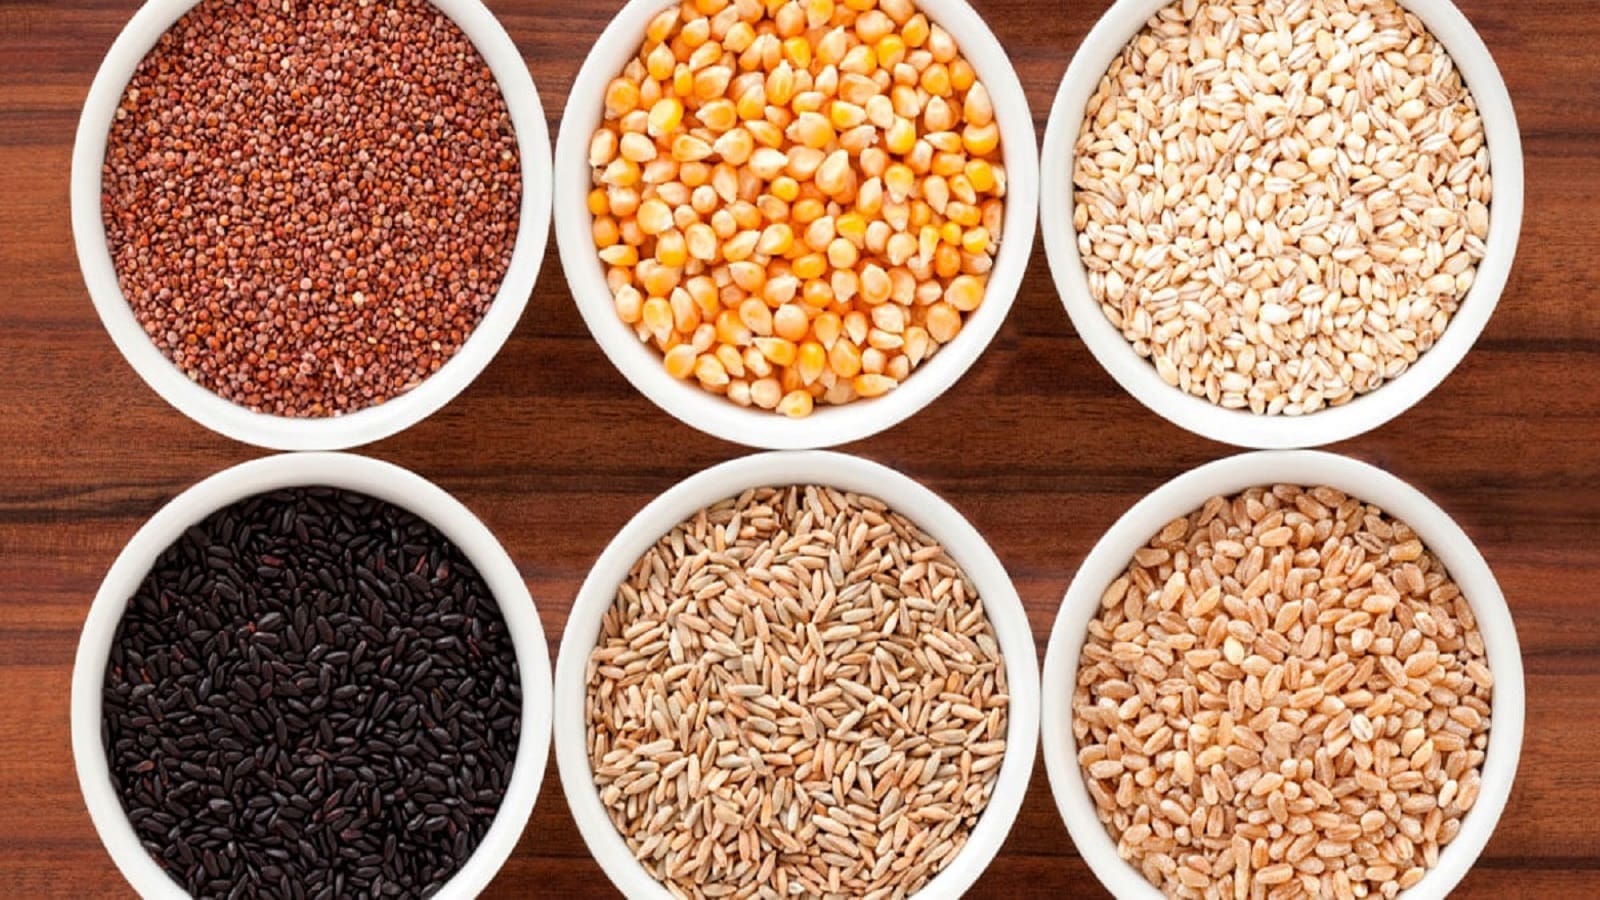 Grain Foods Foundation cautions against simulation to replace grains in dietary guidelines